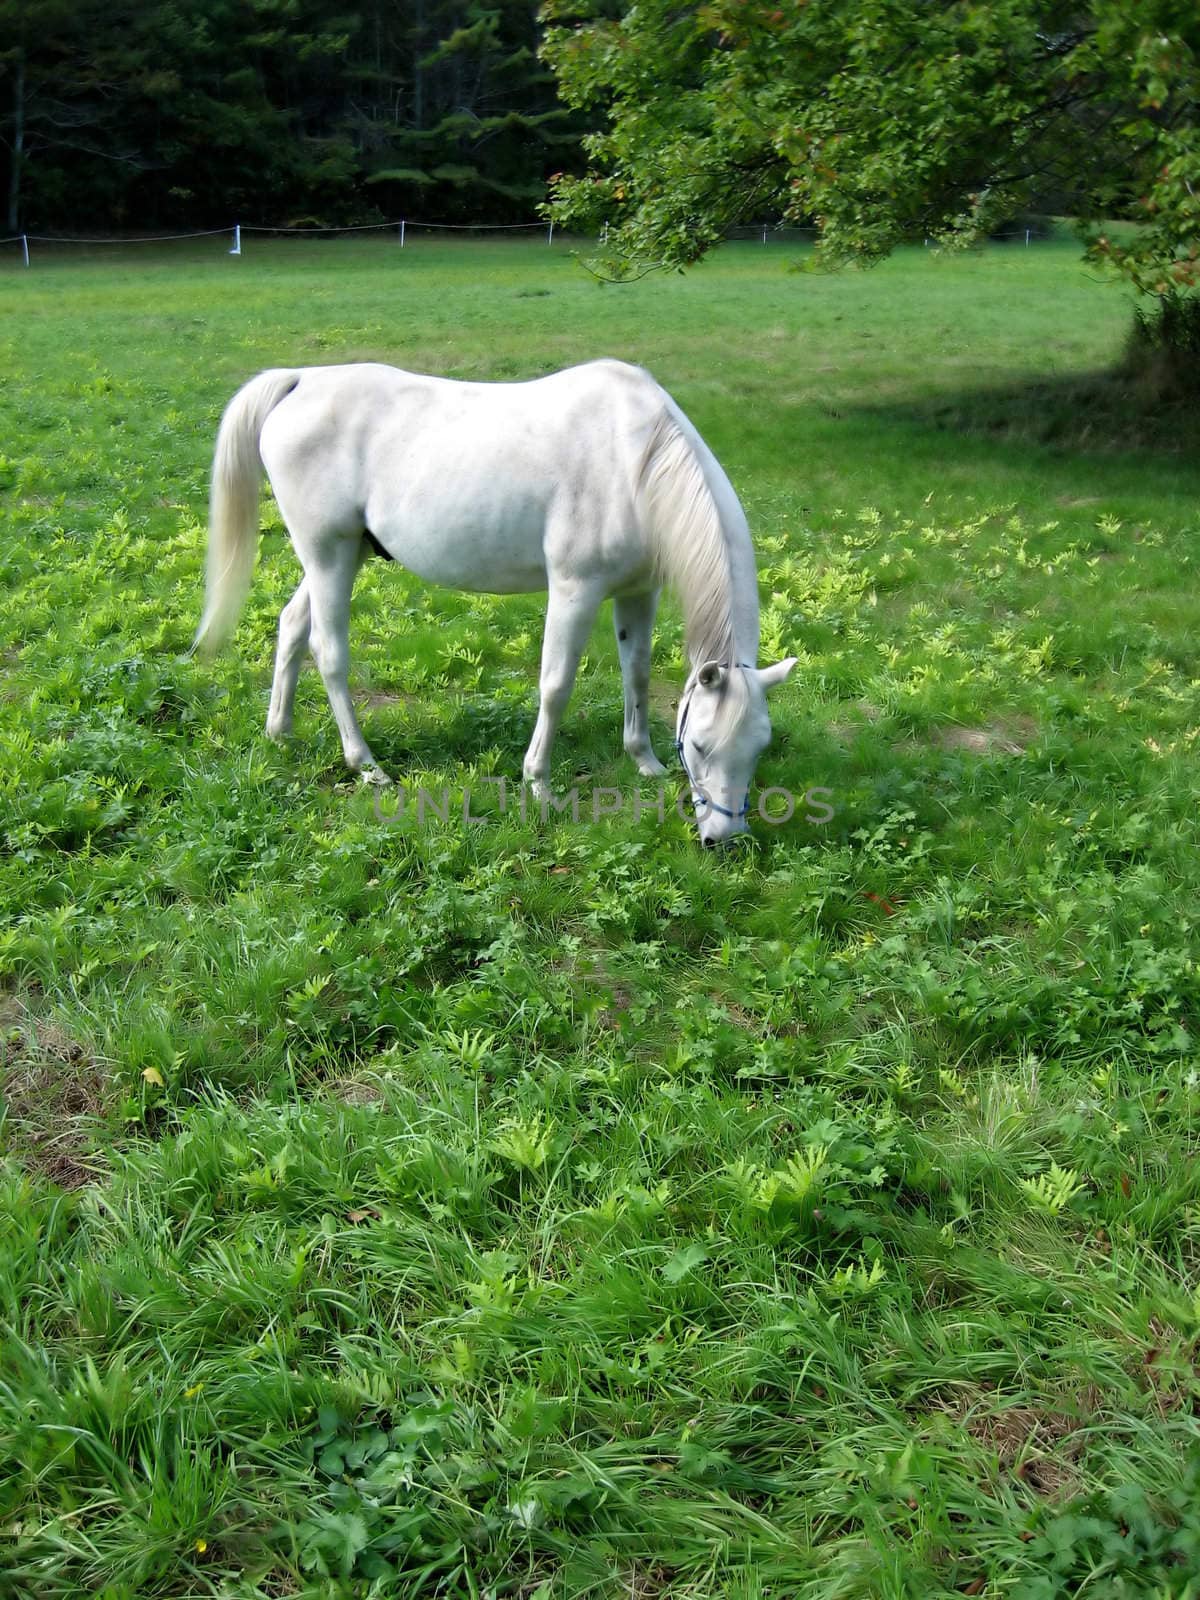 Dappled Gray Horse Grazing #5 by loongirl